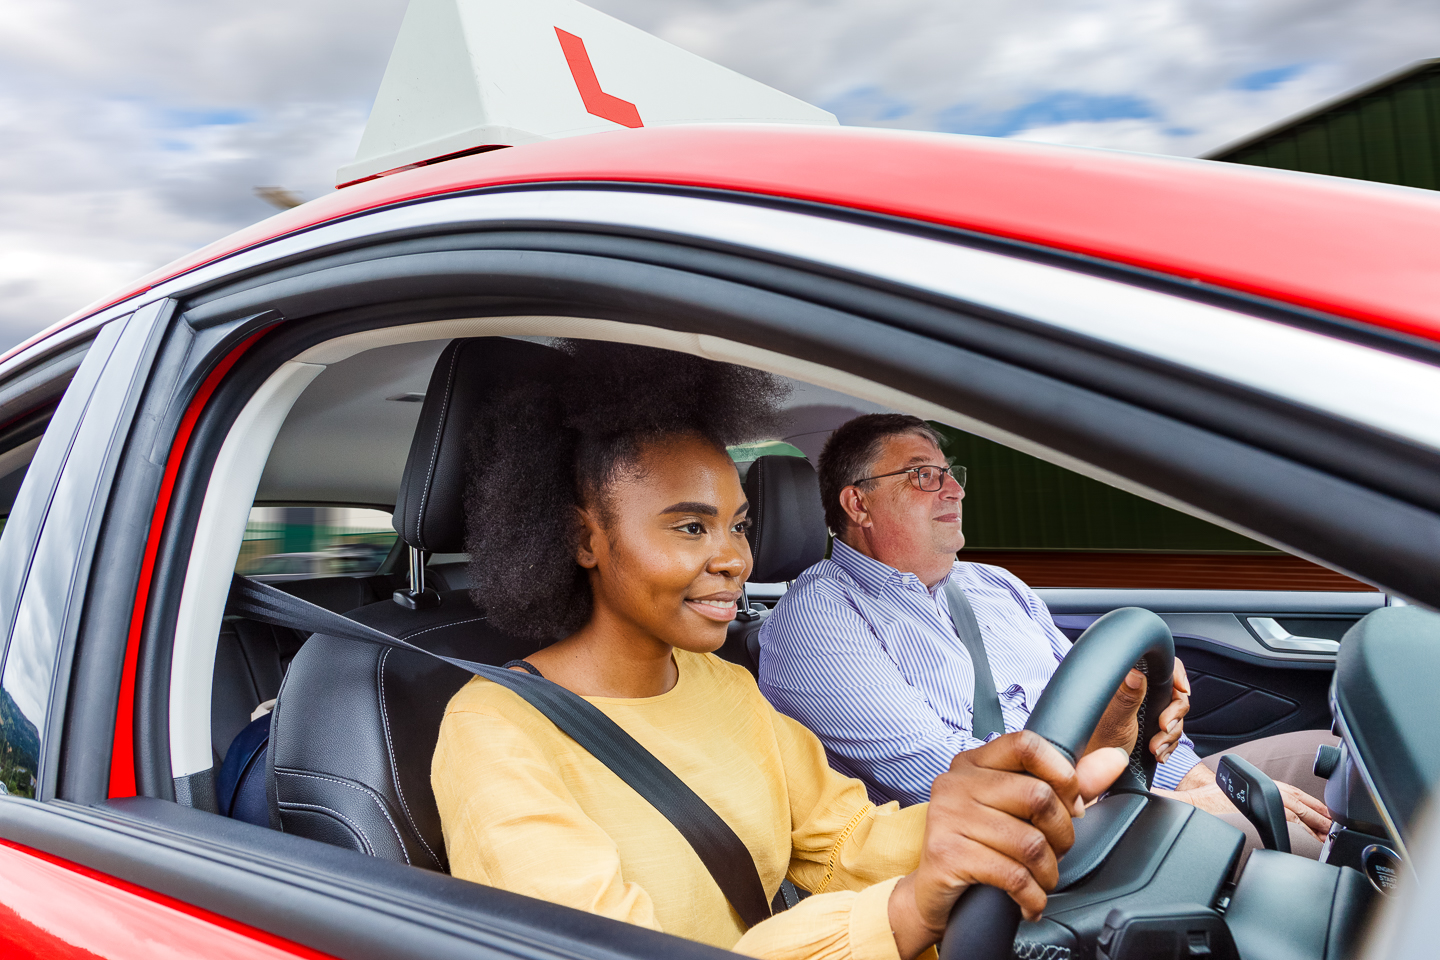 Automatic Driving Lessons Watford